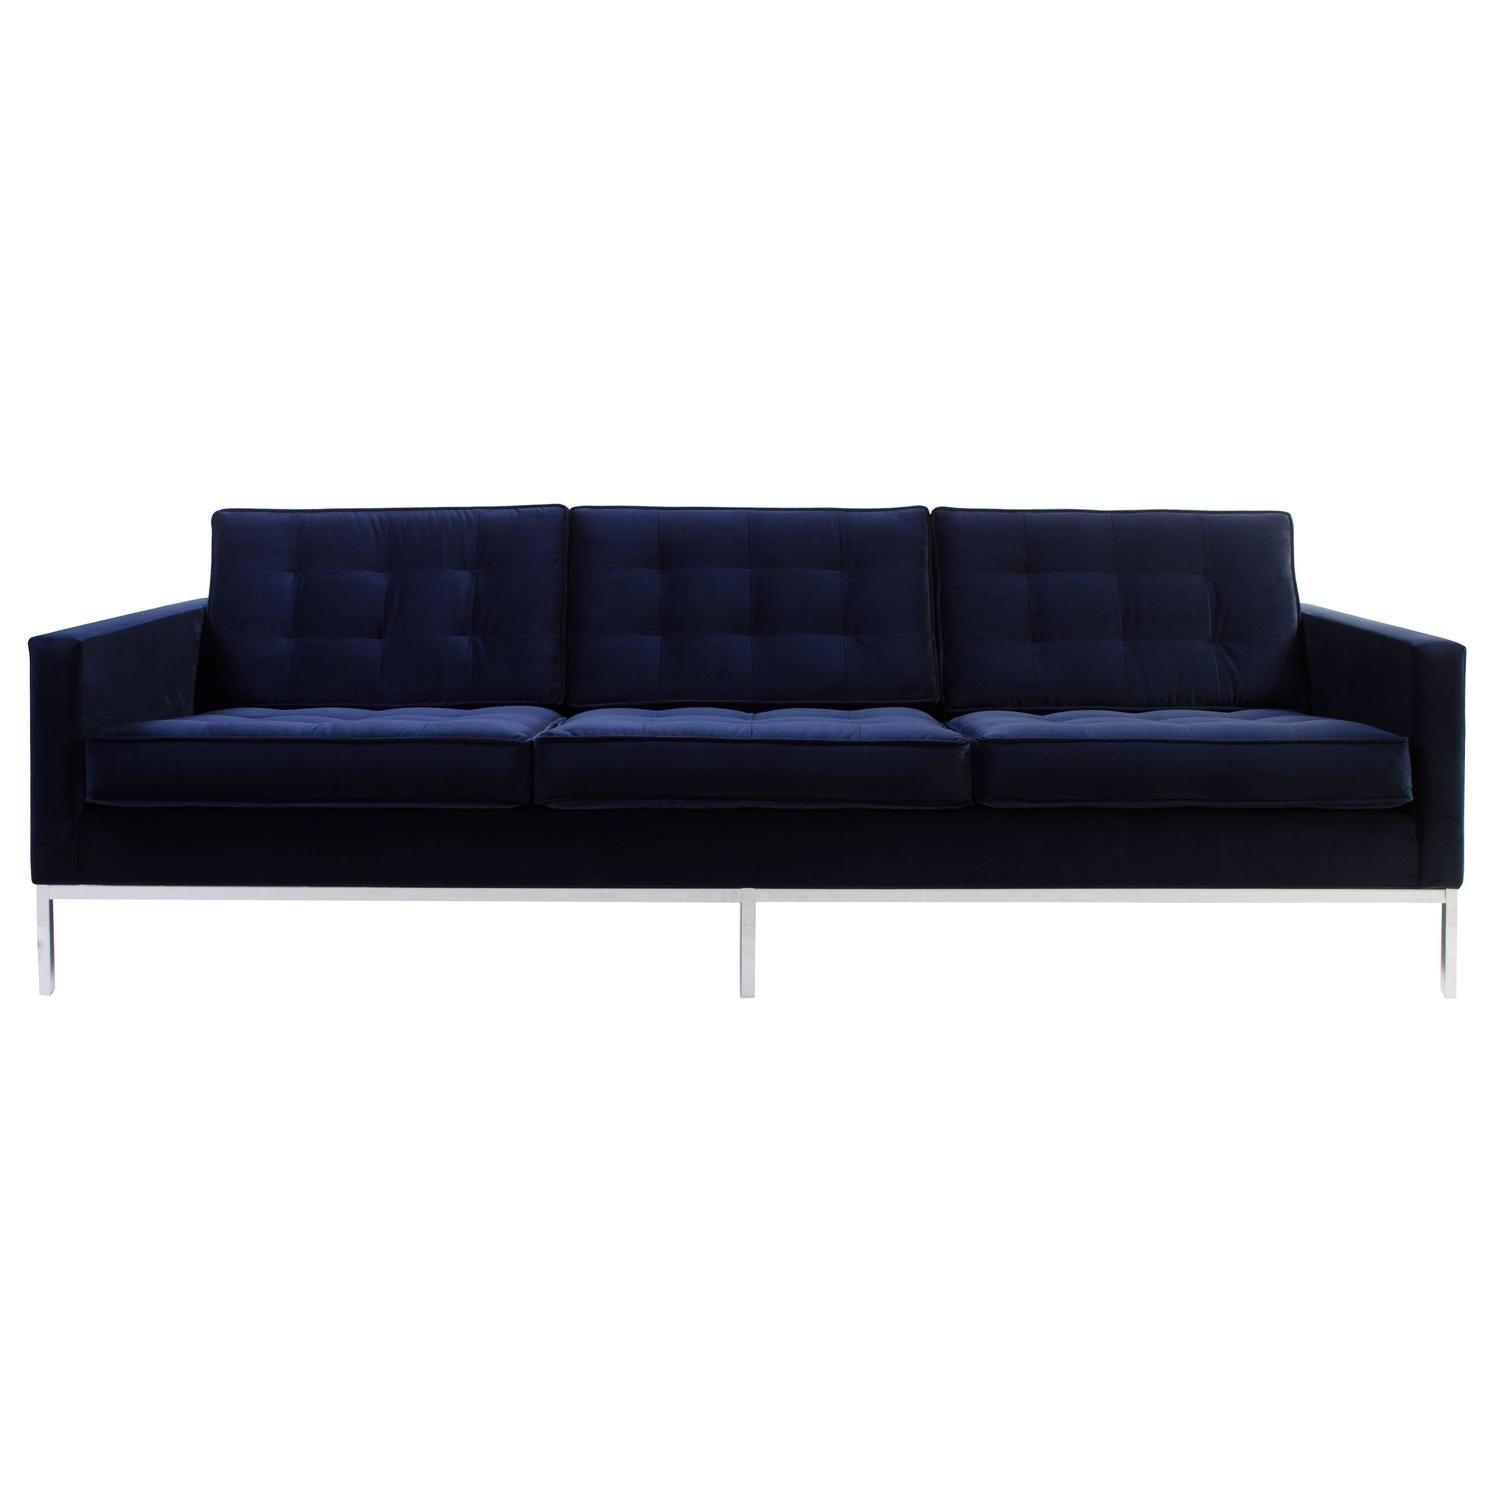 Florence Knoll Sofa In Navy Velvet For Sale At 1stdibs Inside Florence Knoll  Wood Legs Sofas (View 3 of 15)